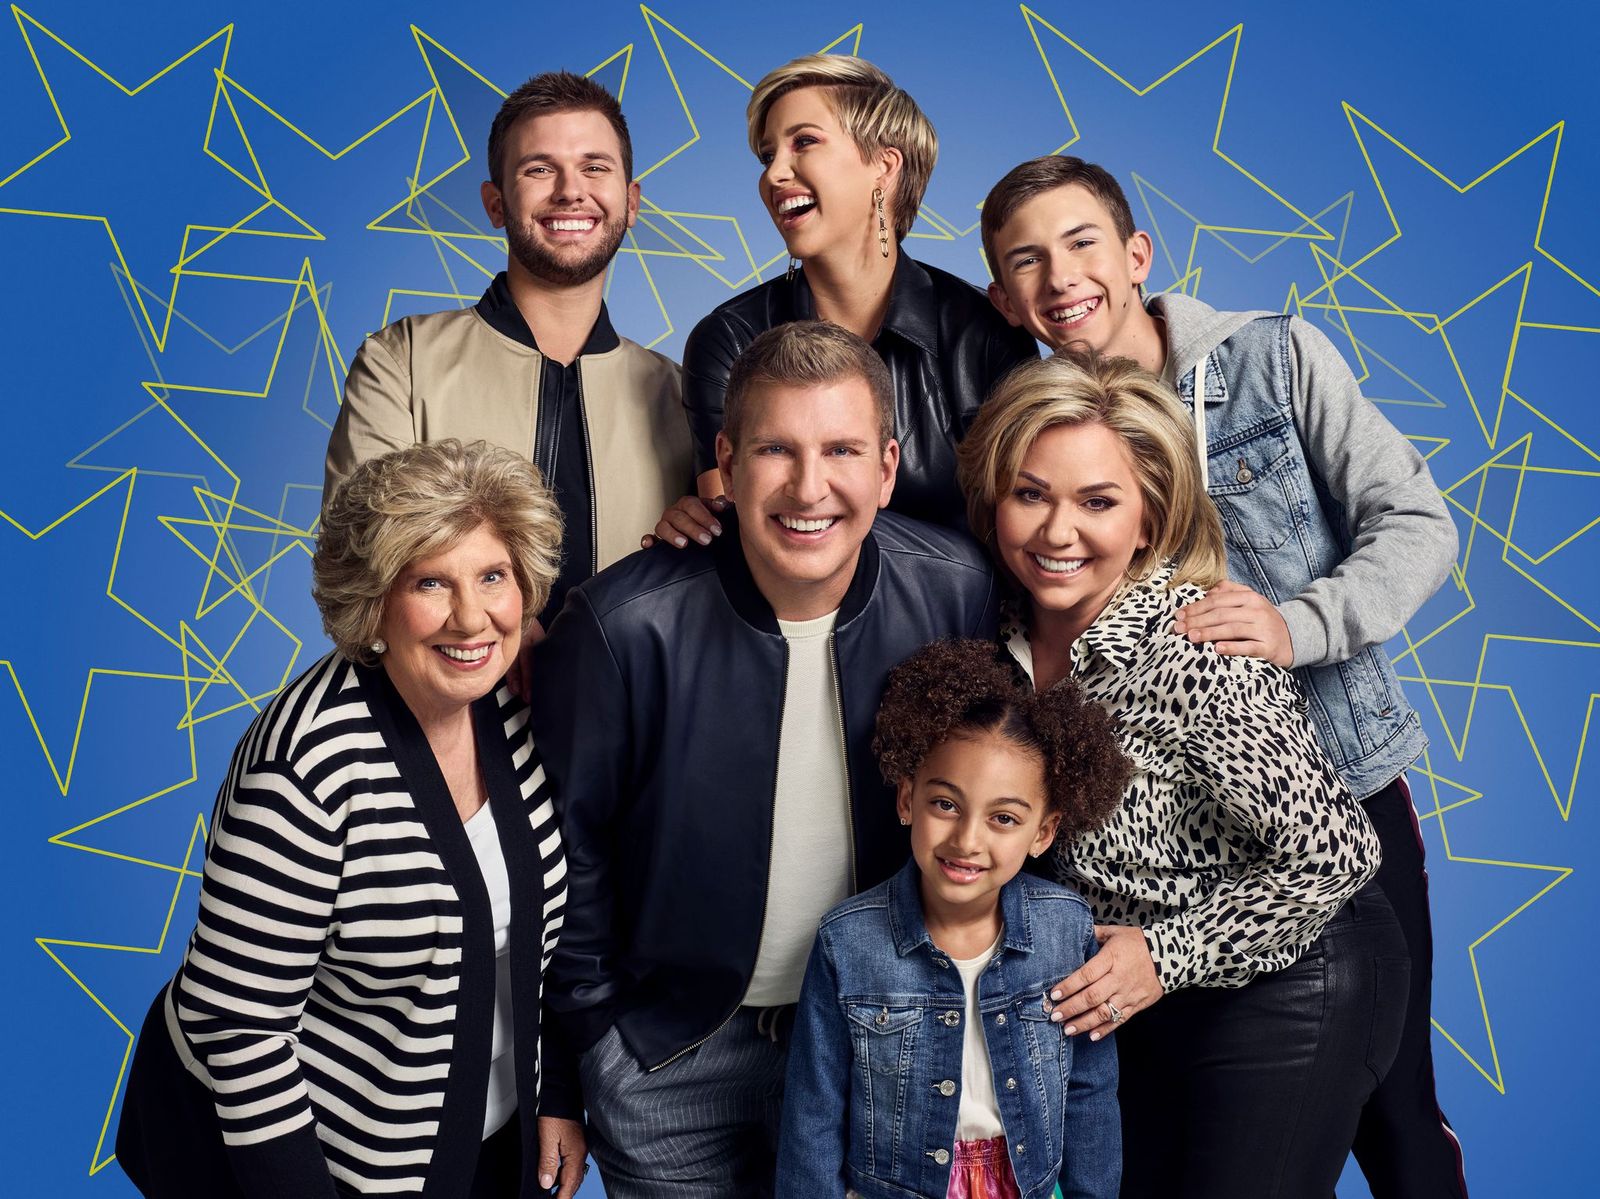 Faye, Chase, Todd, Savannah, Chloe, Julie, and Grayson Chrisley on "Chrisley Knows Best" | Photo: Tommy Garcia/USA Network/NBCU Photo Bank/Getty Images